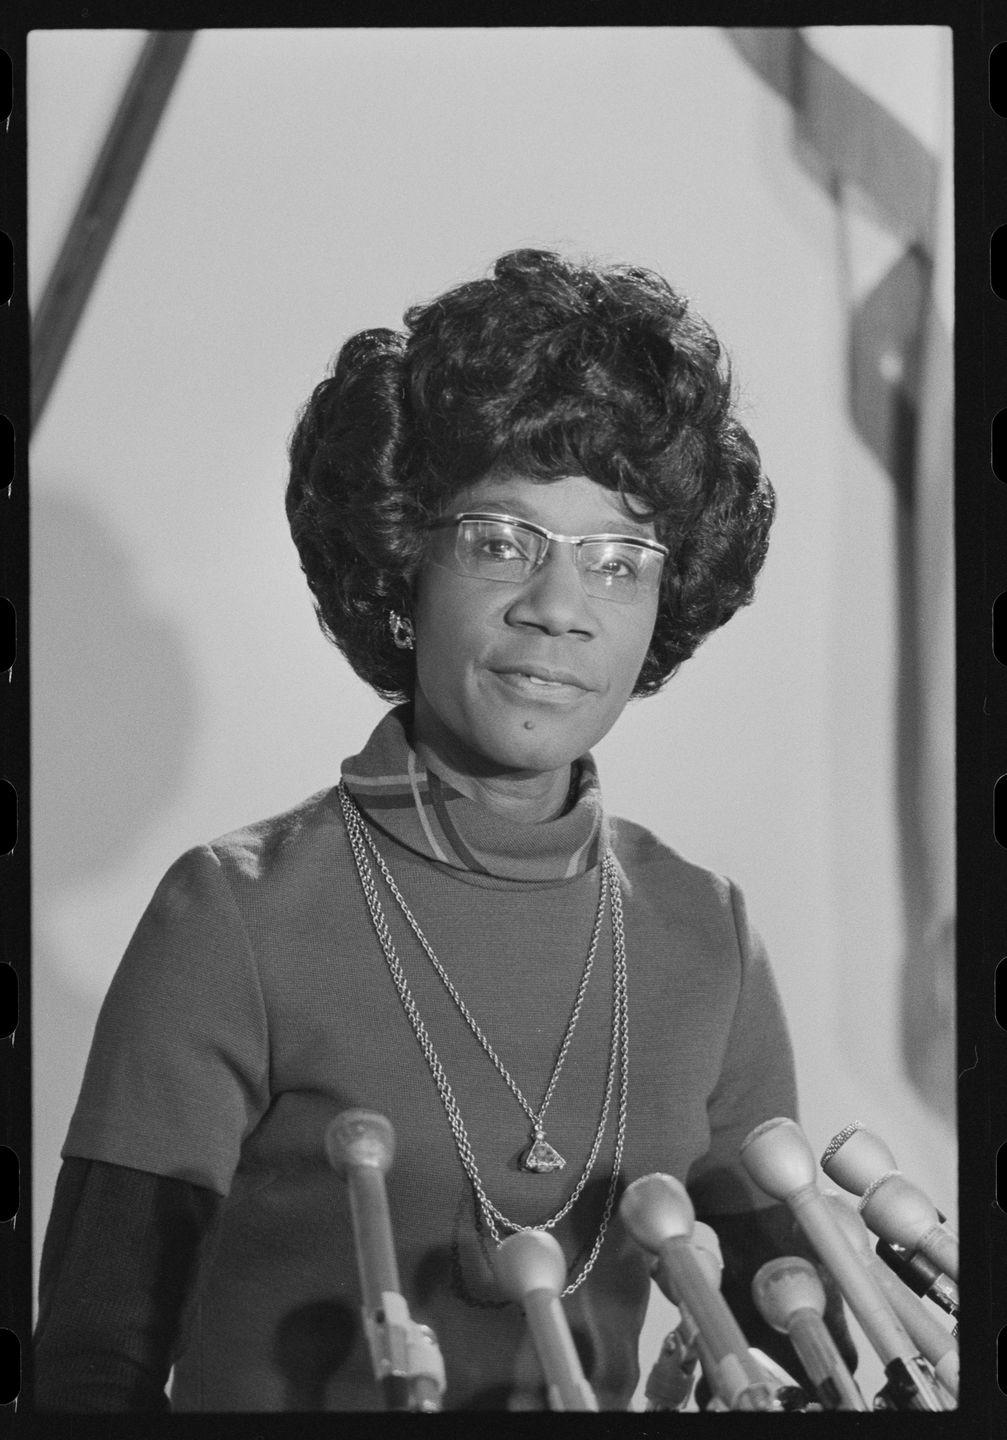 american politician us representative shirley chisholm 1924 2005 speaks at a congressional black caucus event related to the state of the union address, washington dc, january 31, 1973 photo by warren k lefflerus news world report magazine photograph collectionphotoquestgetty images